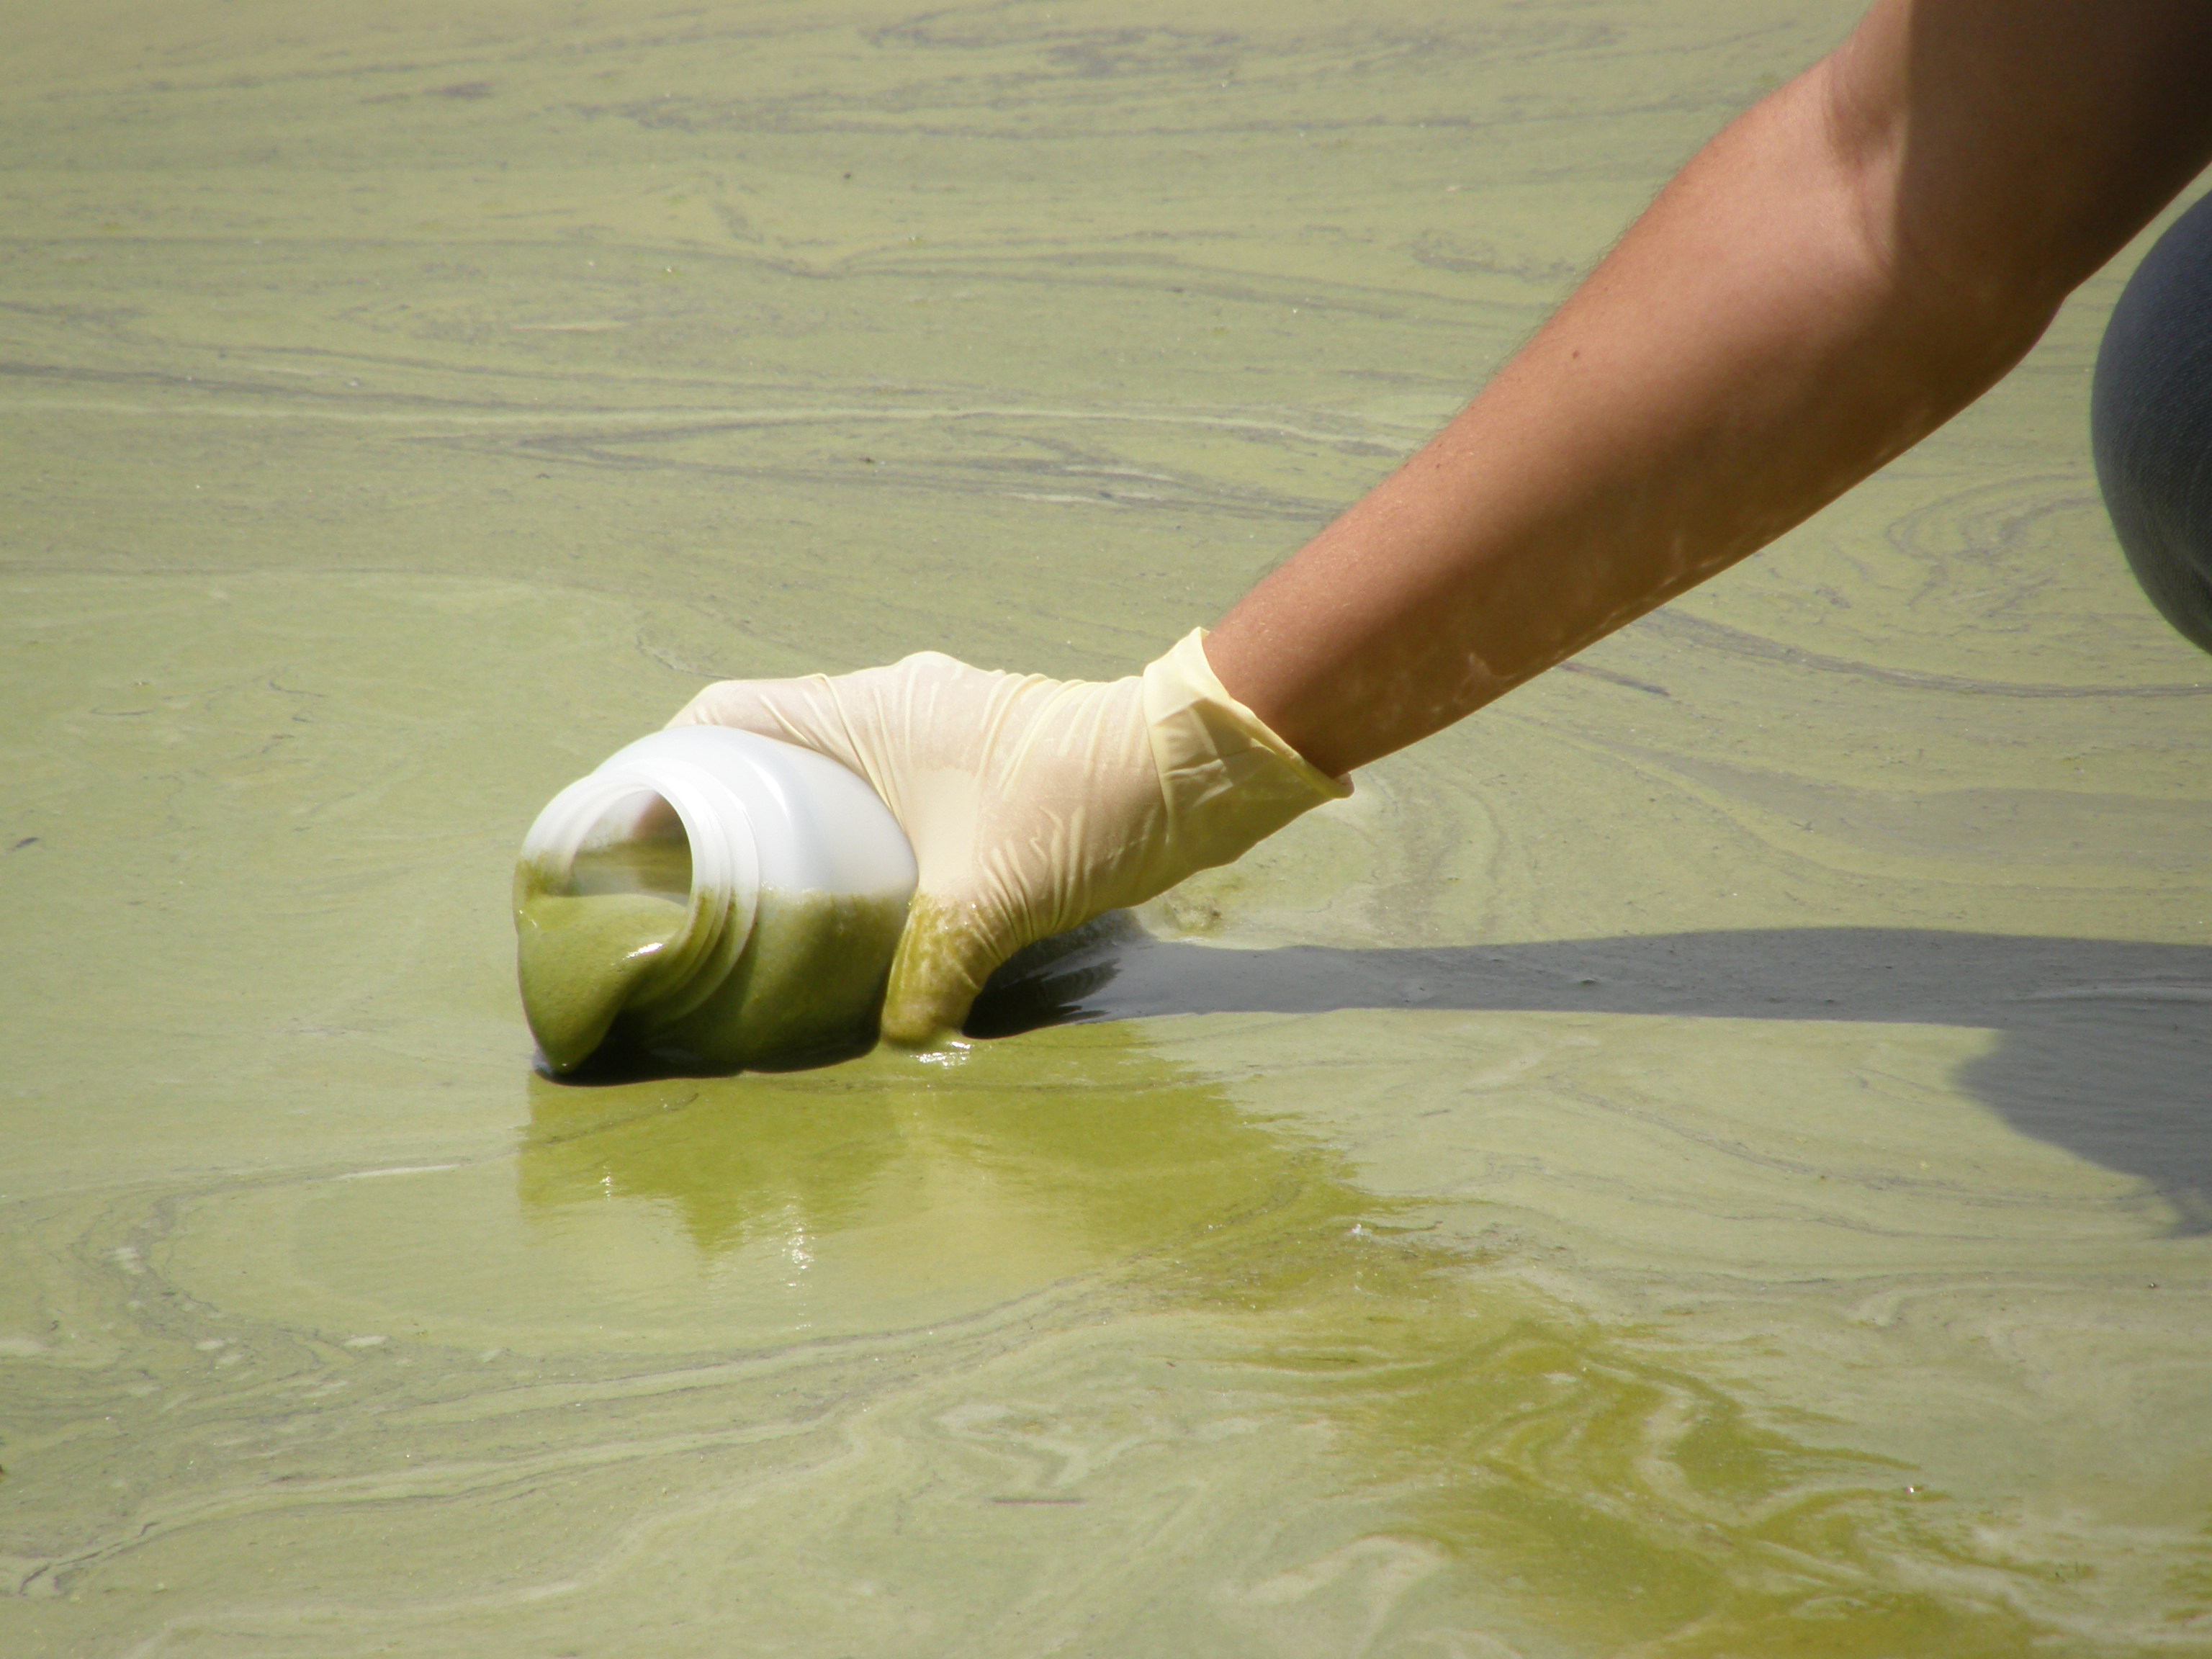 Harmful algal blooms are an accumulation of tiny organisms known as algae and can release harmful toxins into the environment. Pictured here is a bloom on the shore of Lake Dora, Florida.